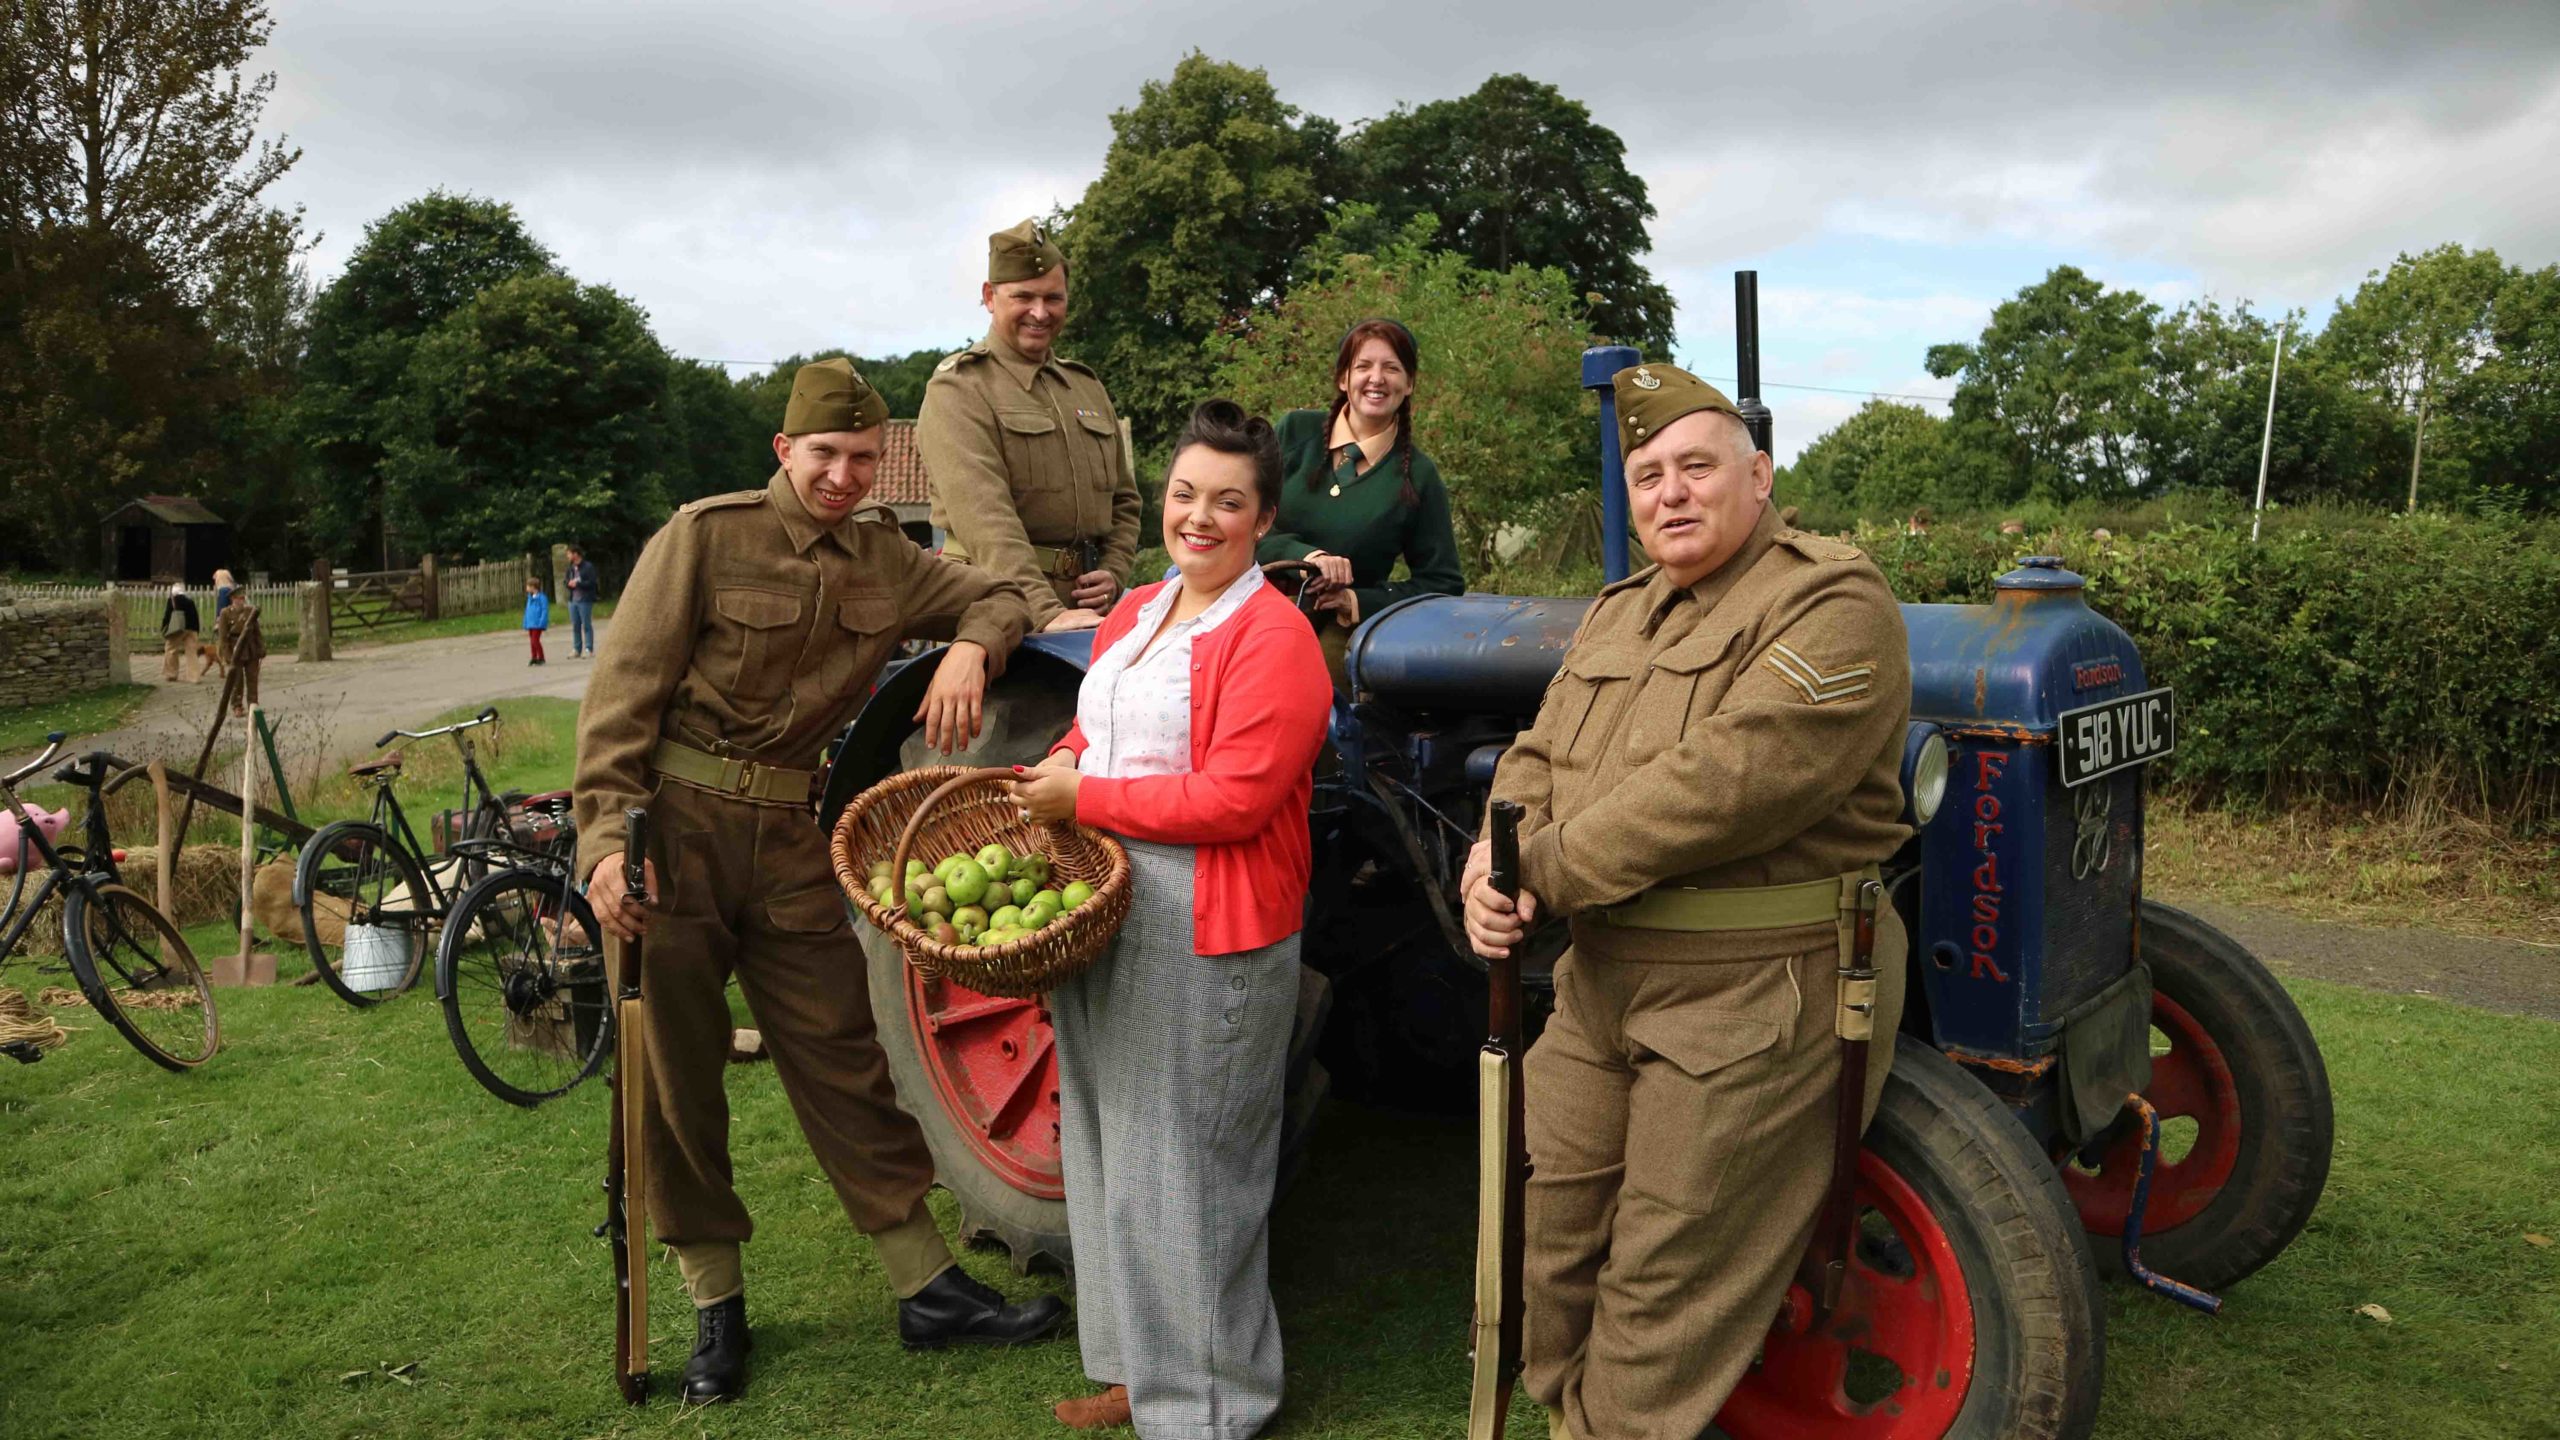 Take Advantage of the Unlimited Pass or Friends of Beamish membership to enjoy Dig for Victory!